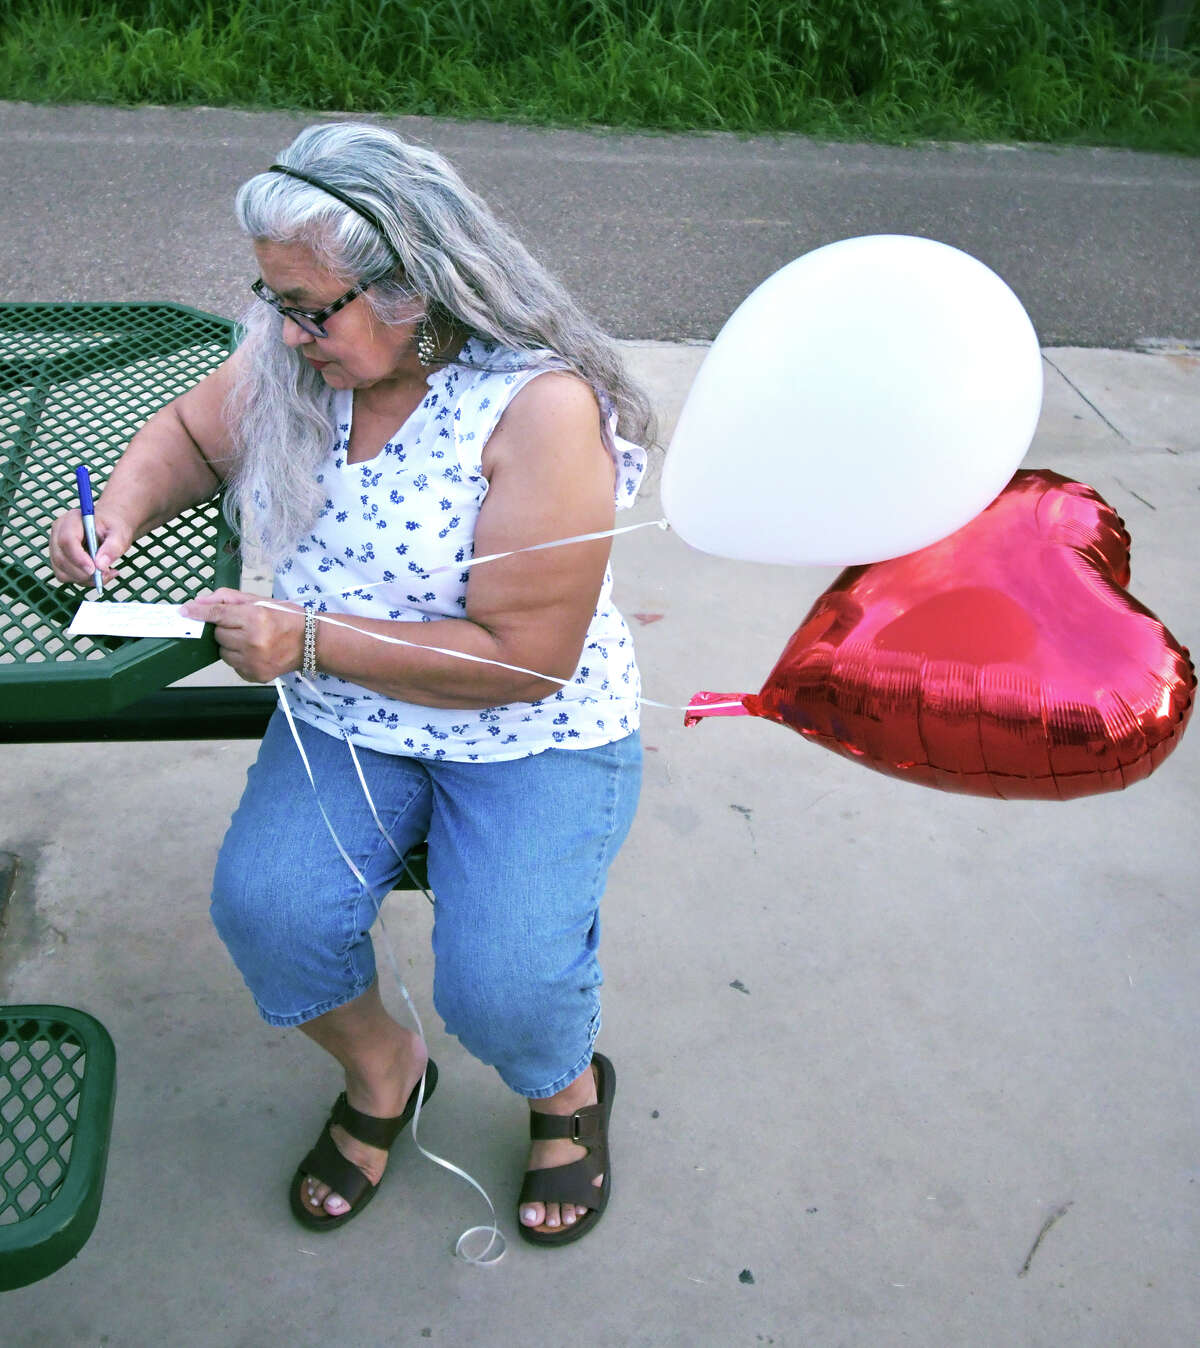 Family and friends of Claudine Luera gathered at North Central Park on Saturday for a remembrance vigil to mark the first anniversary of her death. White and heart-shaped red balloons with messages attached were released in her honor.